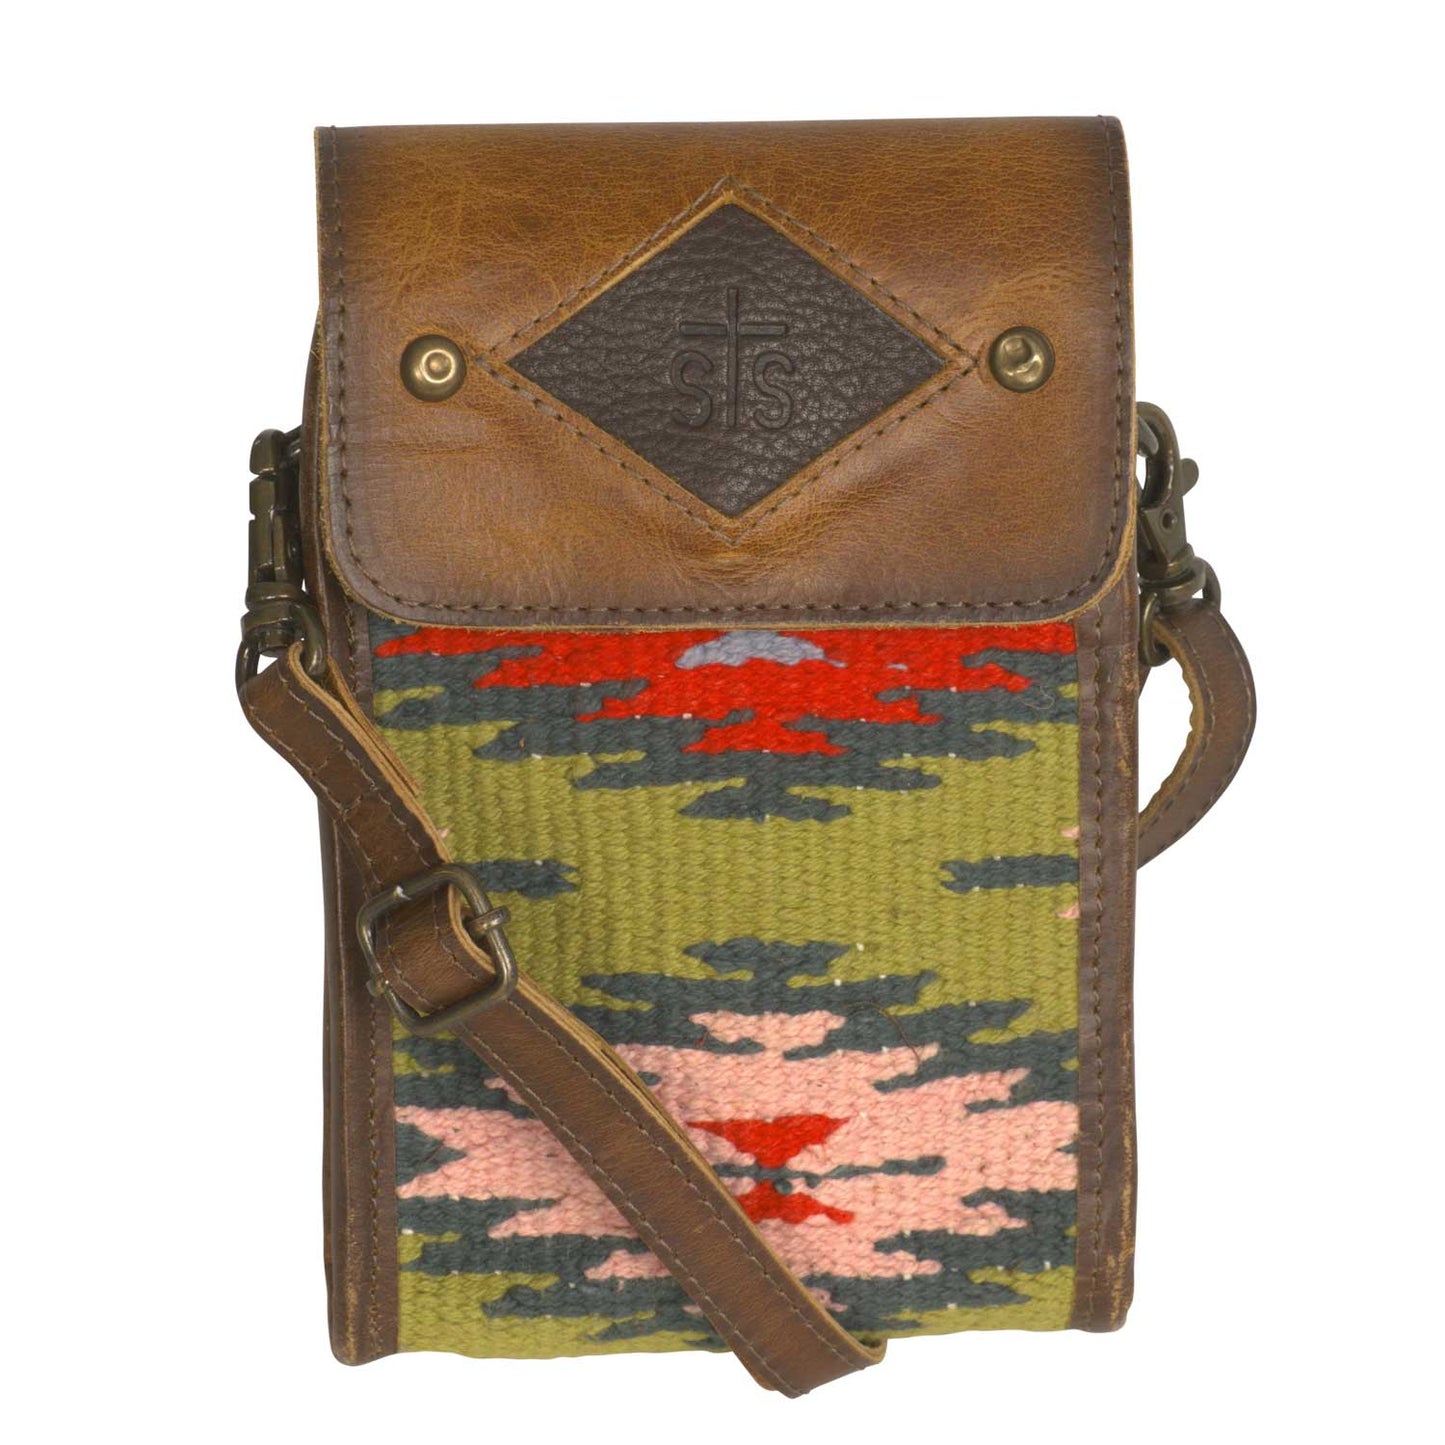 Baja Dreams Cellphone Pouch by STS Ranchwear